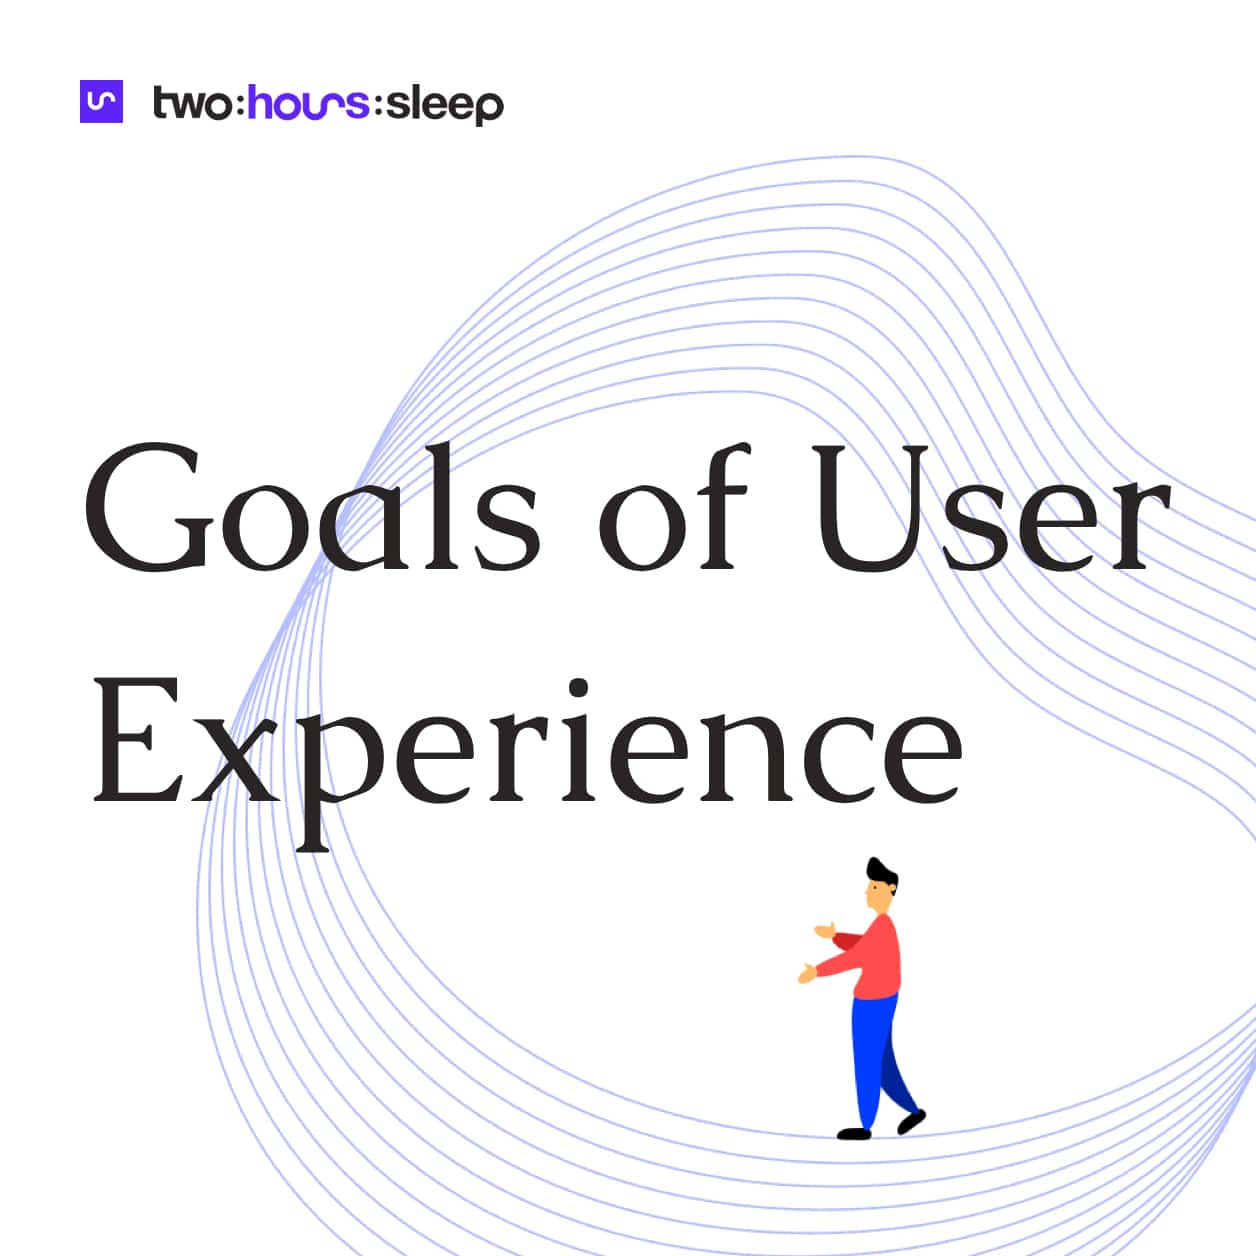 Goals of User Experience